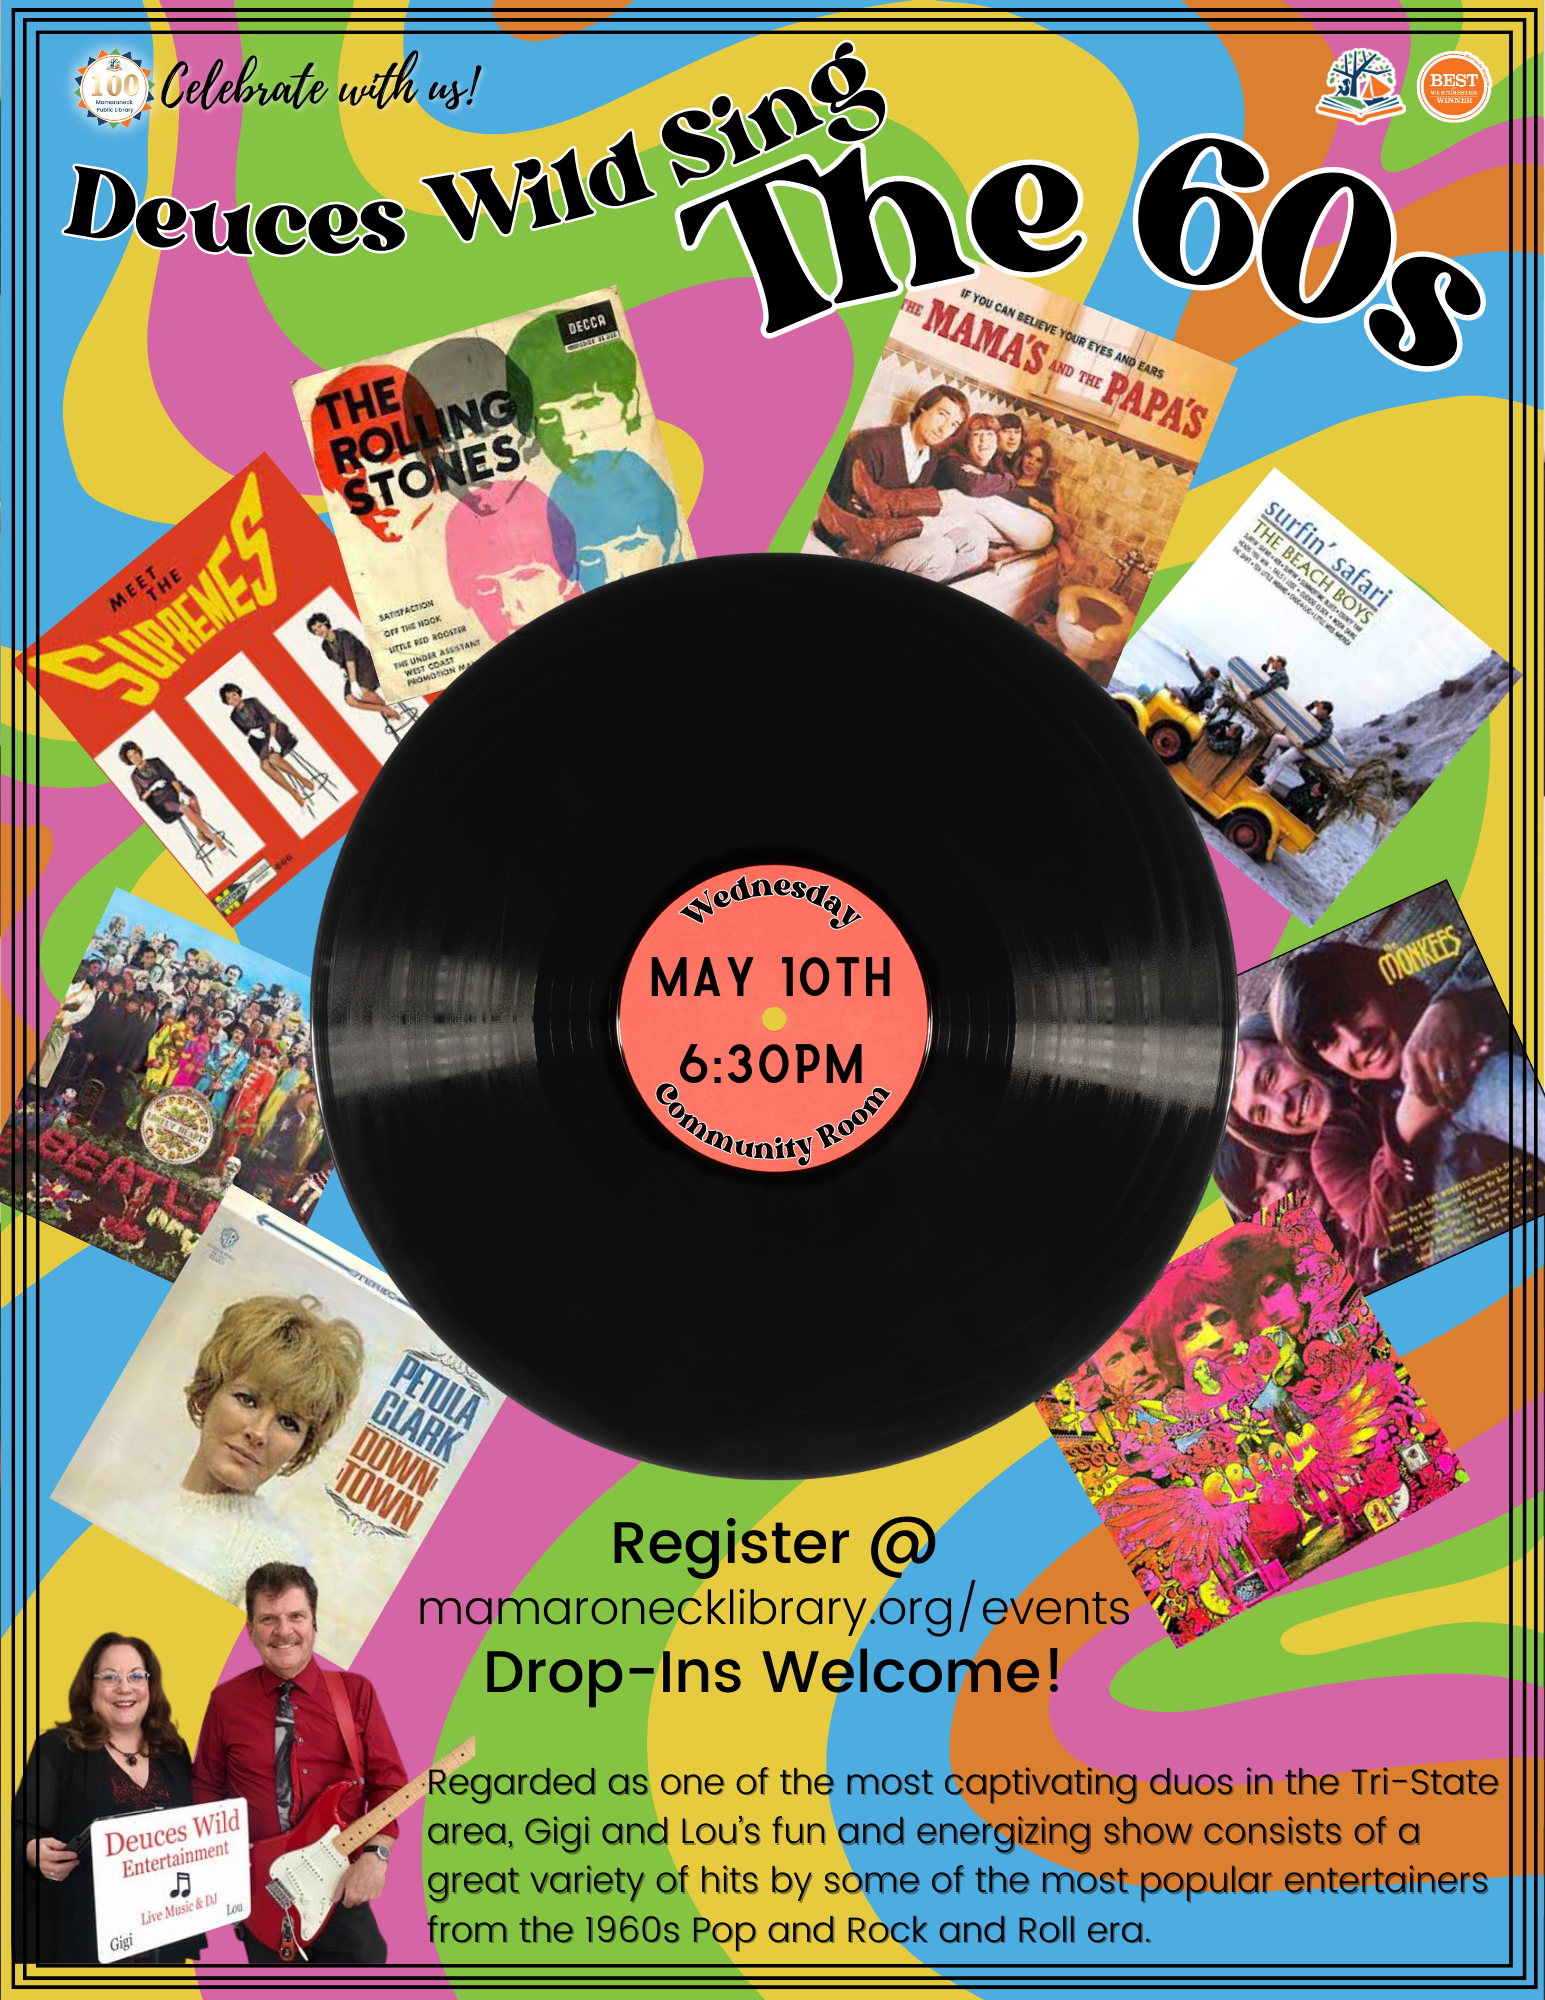 5/10 @ 6:30pm in the Community room - Deuces Wild Sing the Sixties